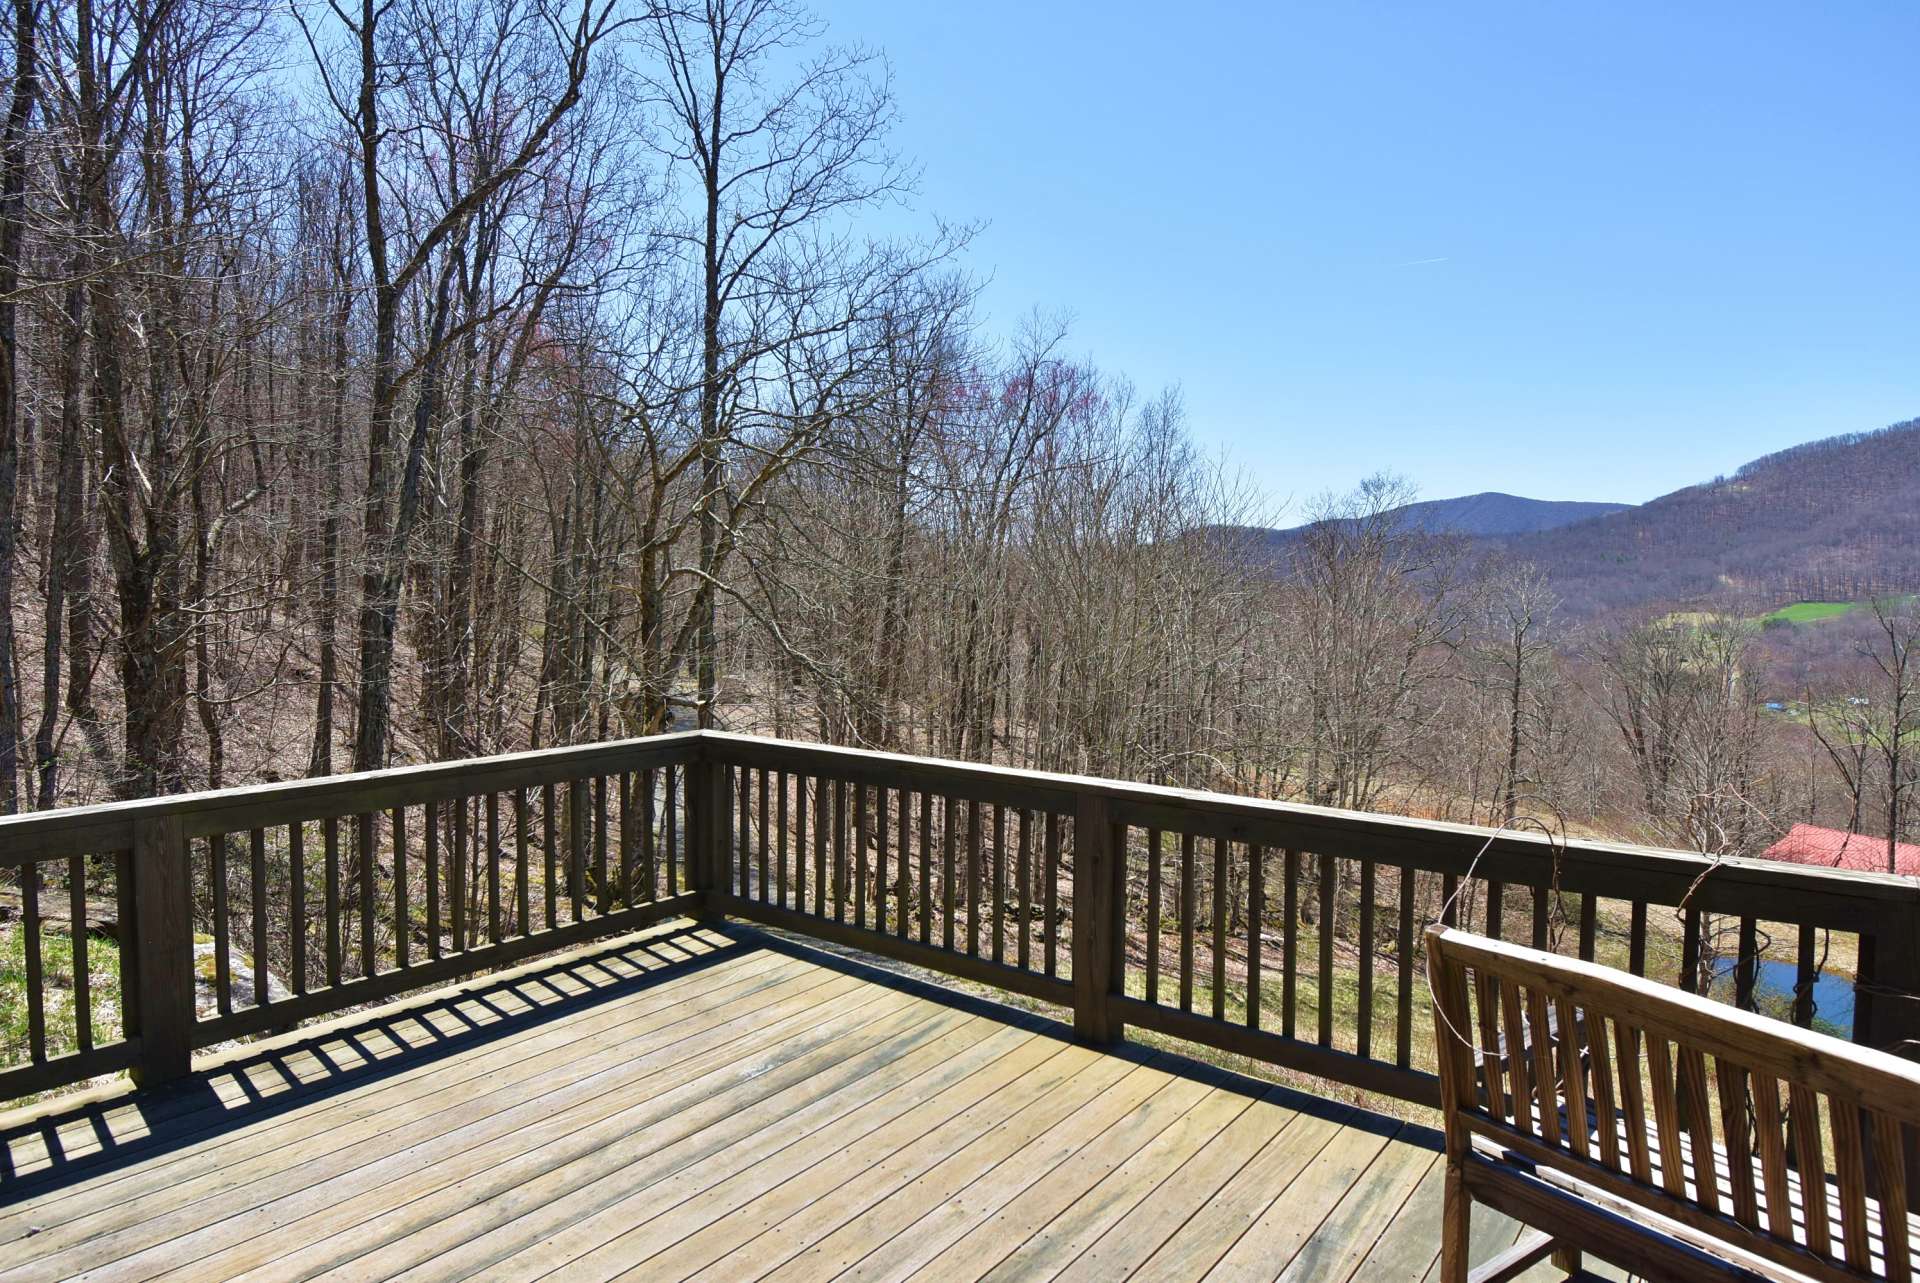 Relax on the wide open deck and enjoy the privacy, the views of ponds, pasture, and mountains, while the sounds of Nature are all around you. Or...